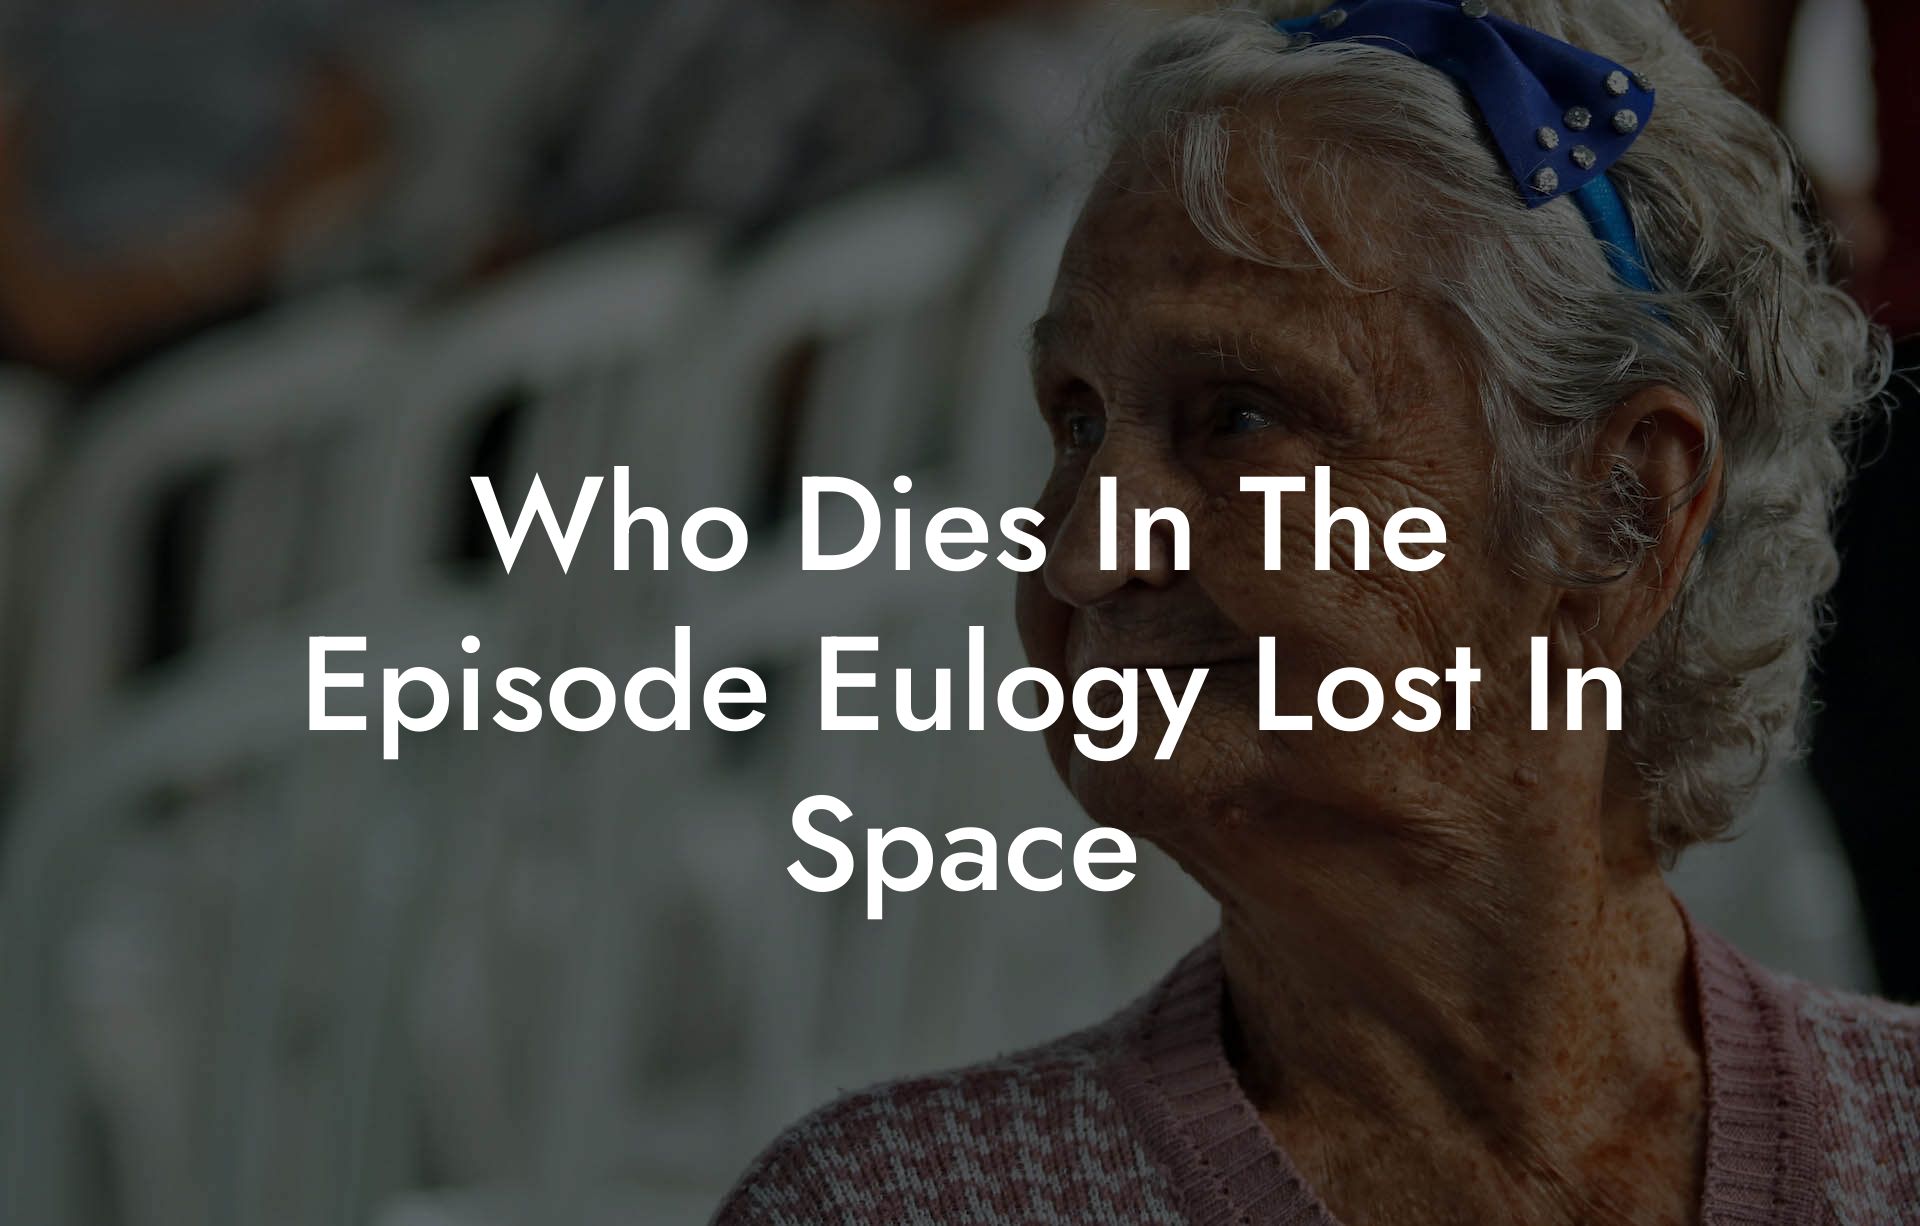 Who Dies In The Episode Eulogy Lost In Space